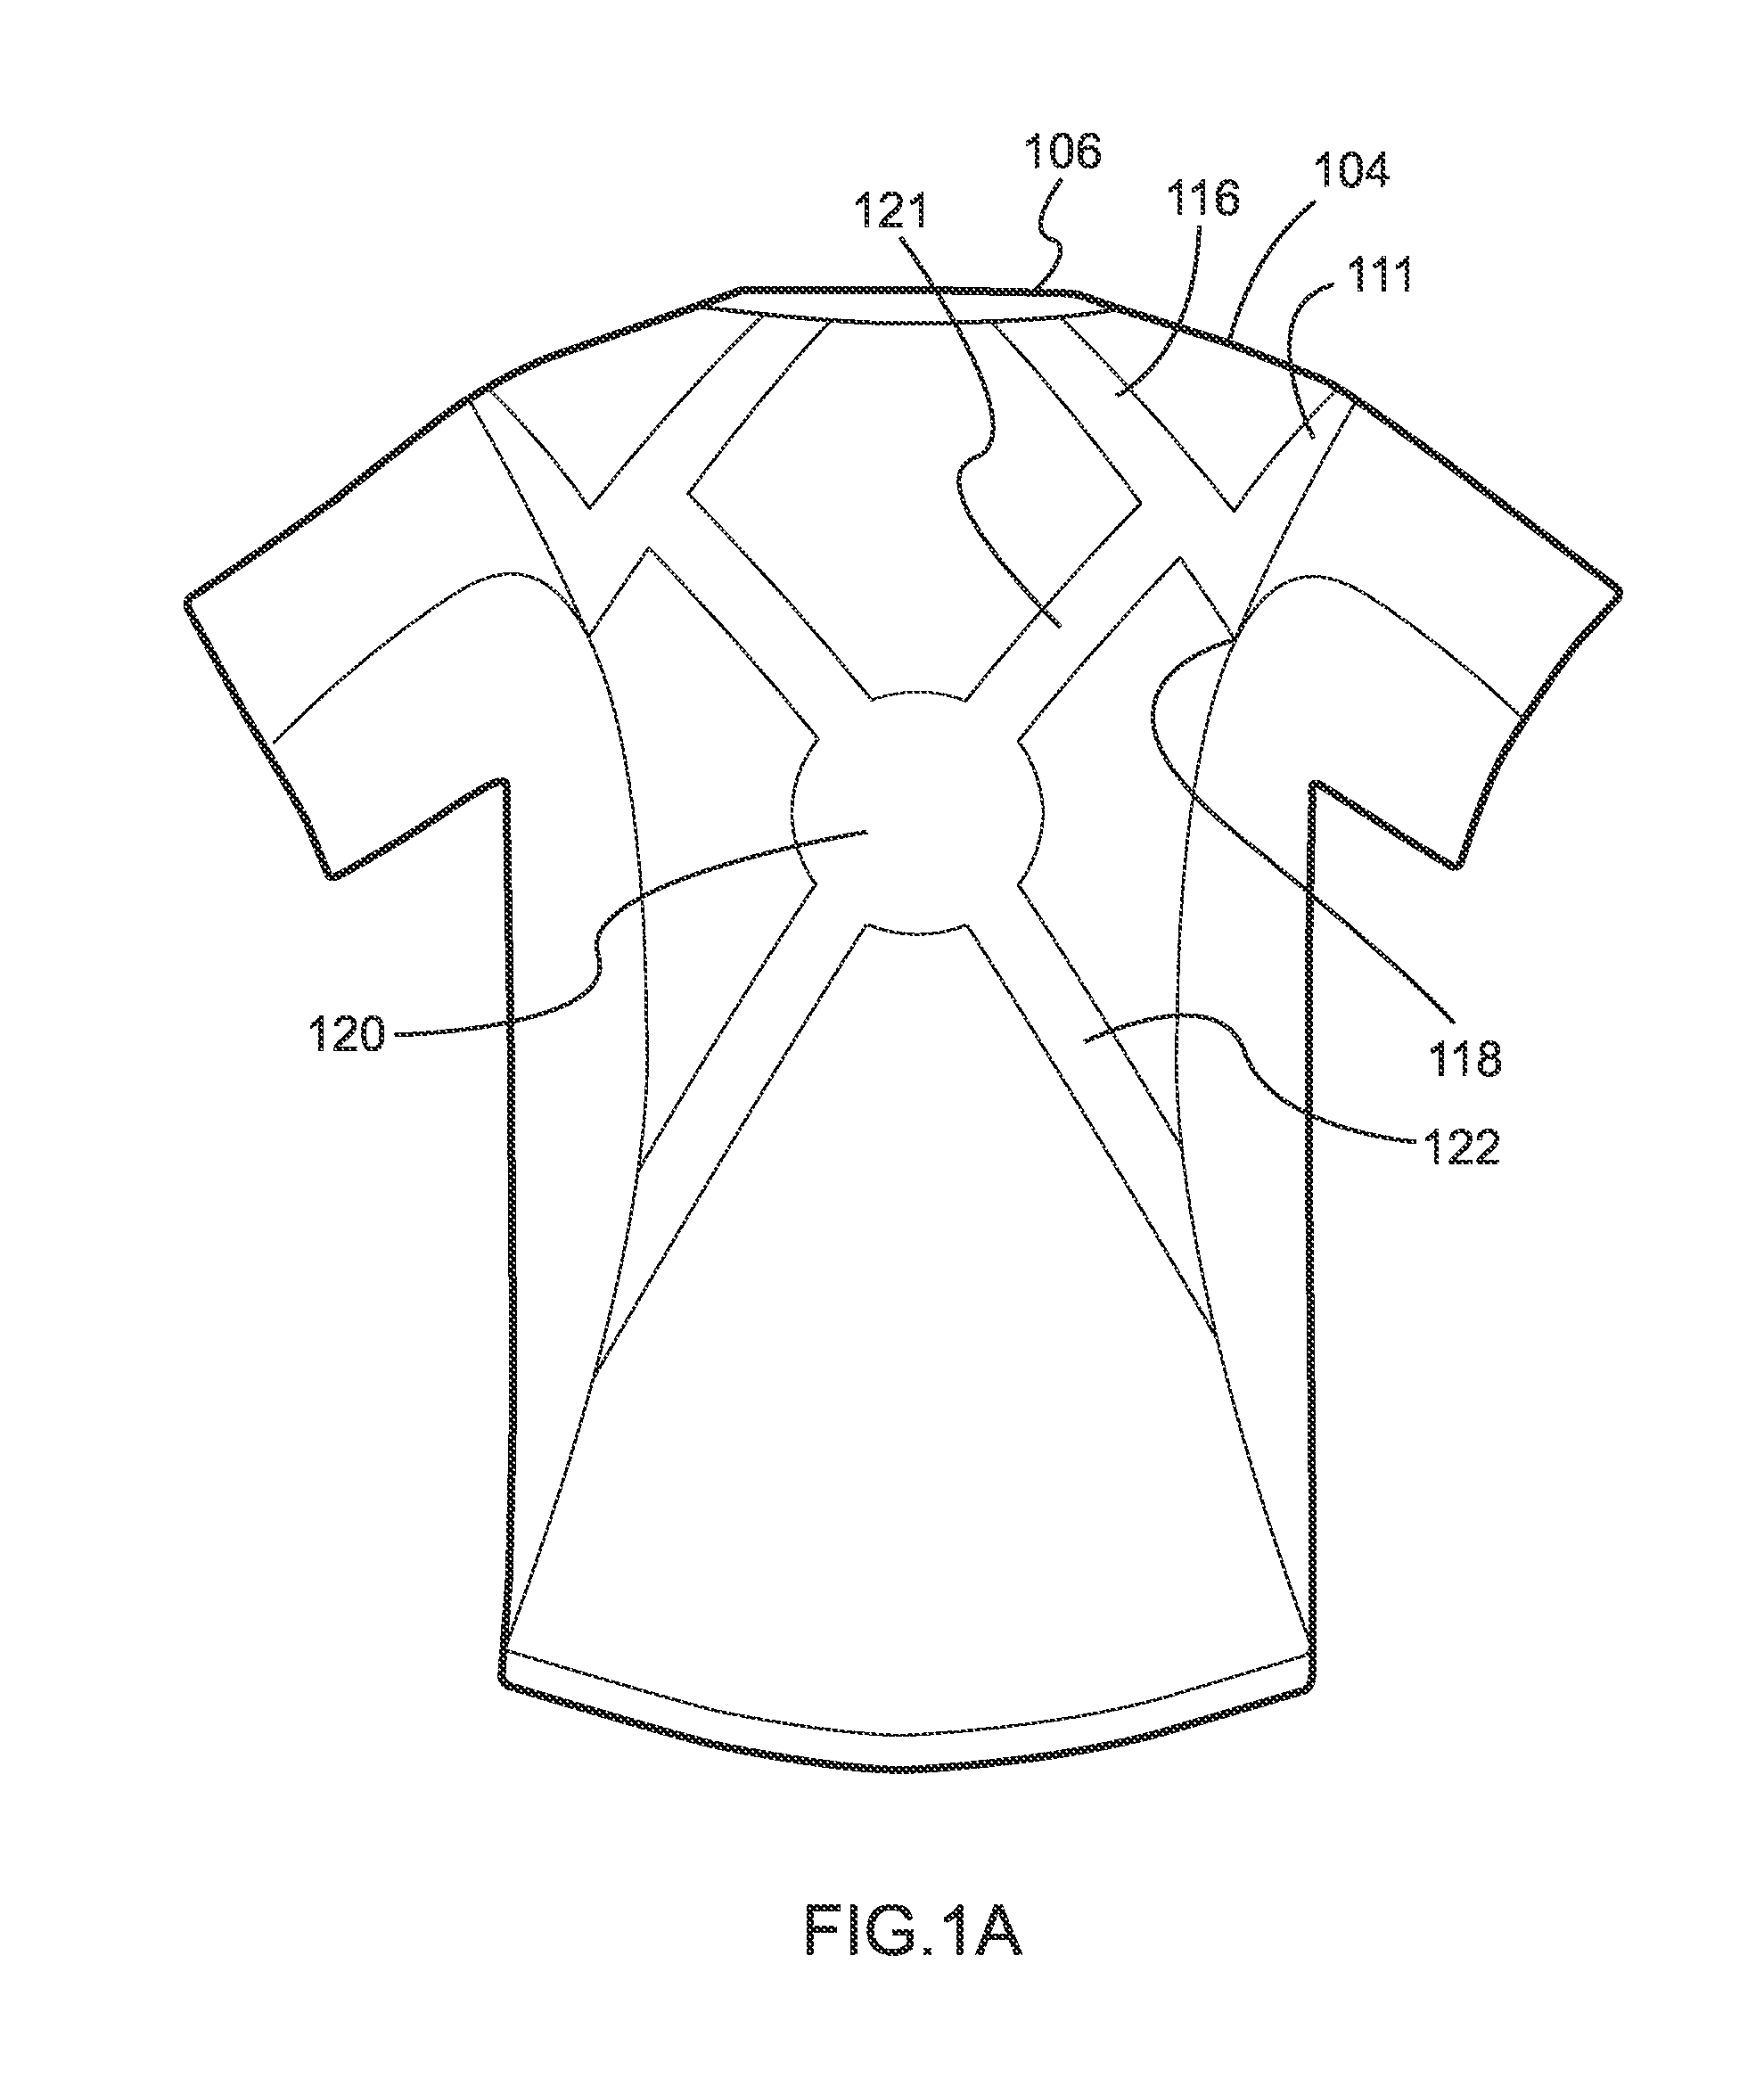 Shirts and shorts having elastic and non-stretch portions and bands to provide hip and posture support